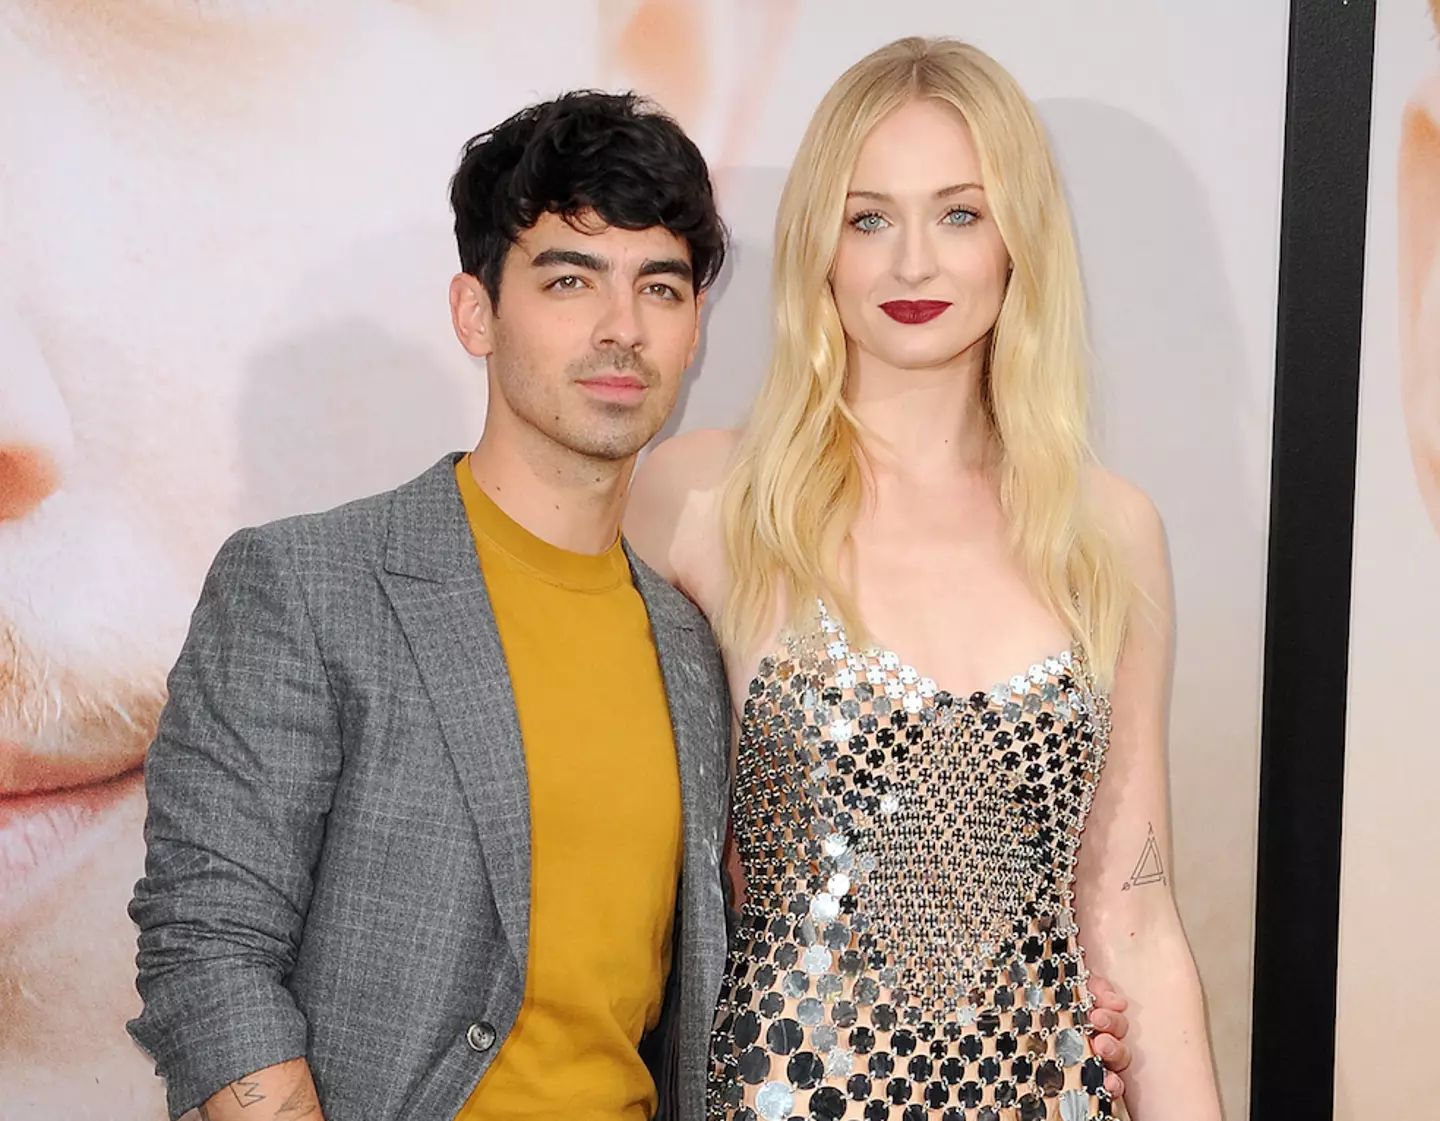 Sophie and Joe welcomed their second child together last month.